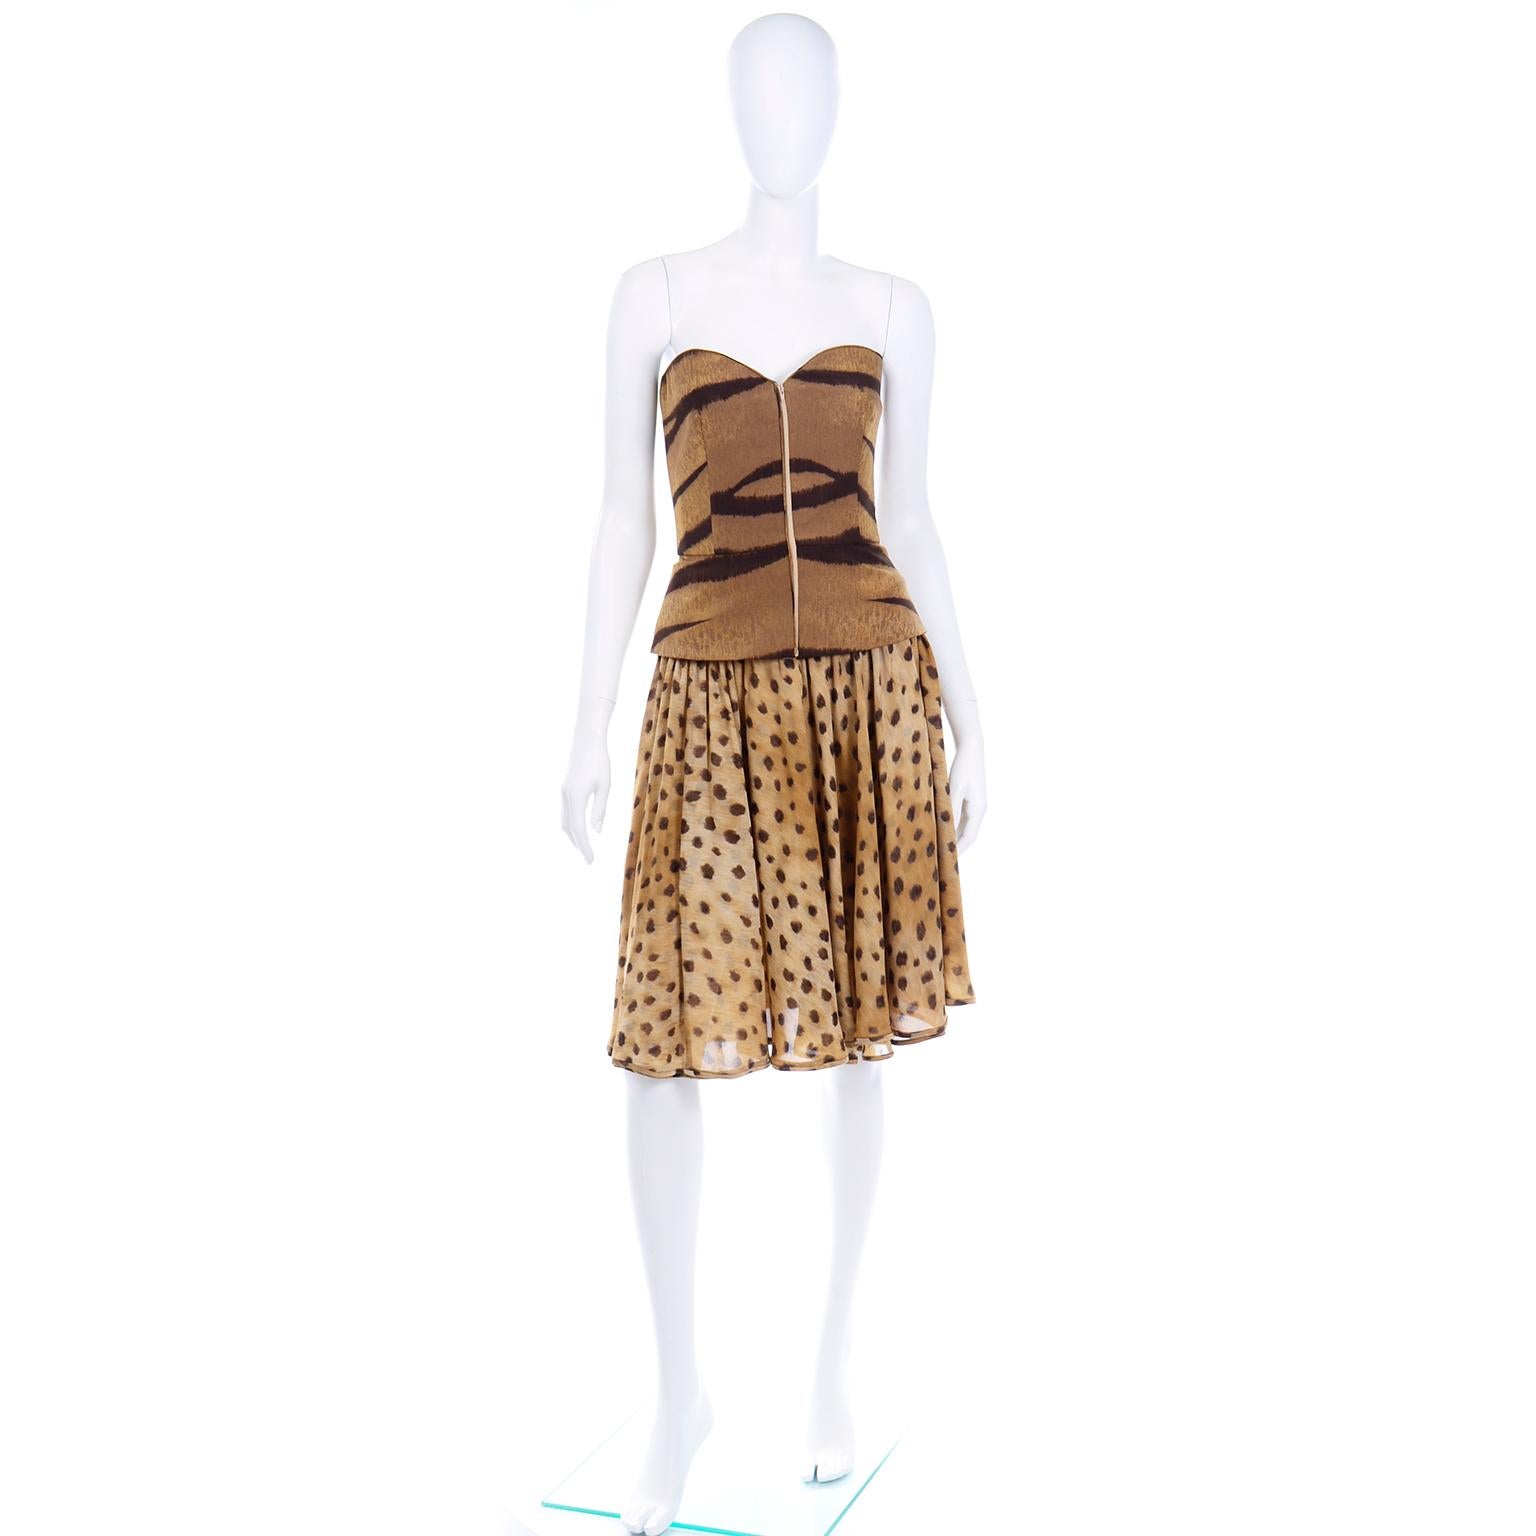 This vintage Valentino bustier skirt set is really fun with mix-match animal prints. The top is more of a brown zebra print and the skirt is more of a cheetah print. Wear the pieces together or break them up and you have wo fabulous separates! The